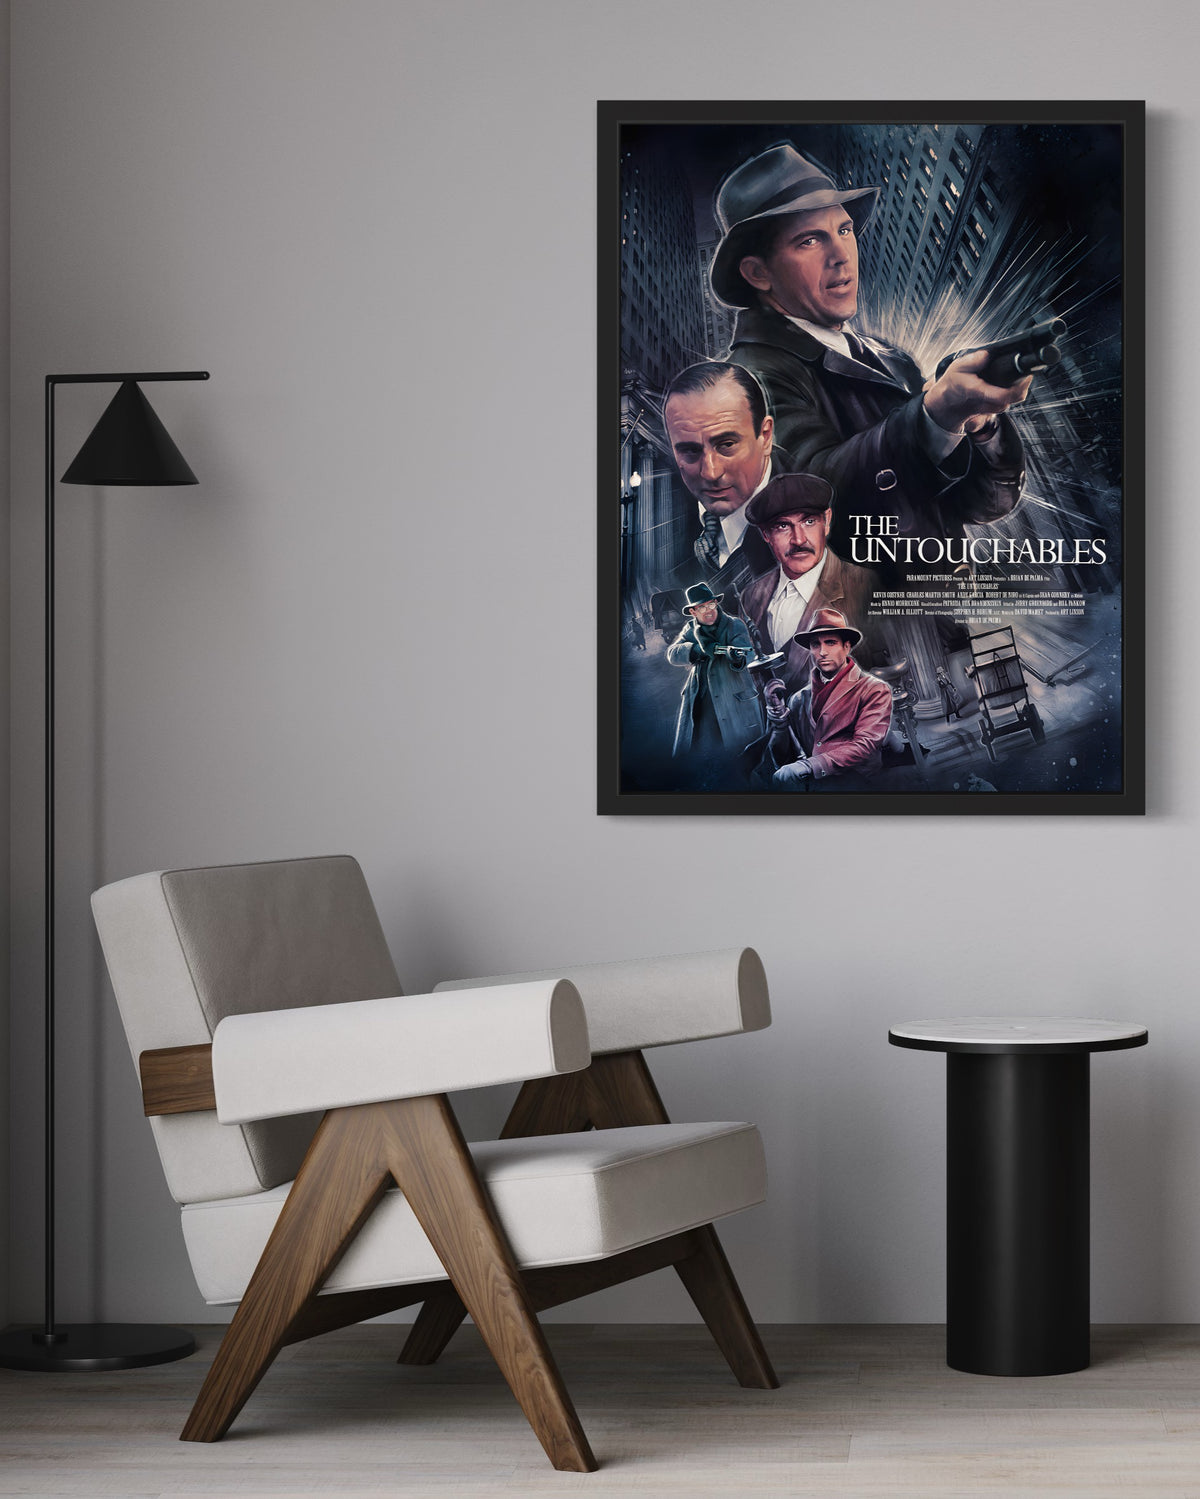 The Untouchables wall art